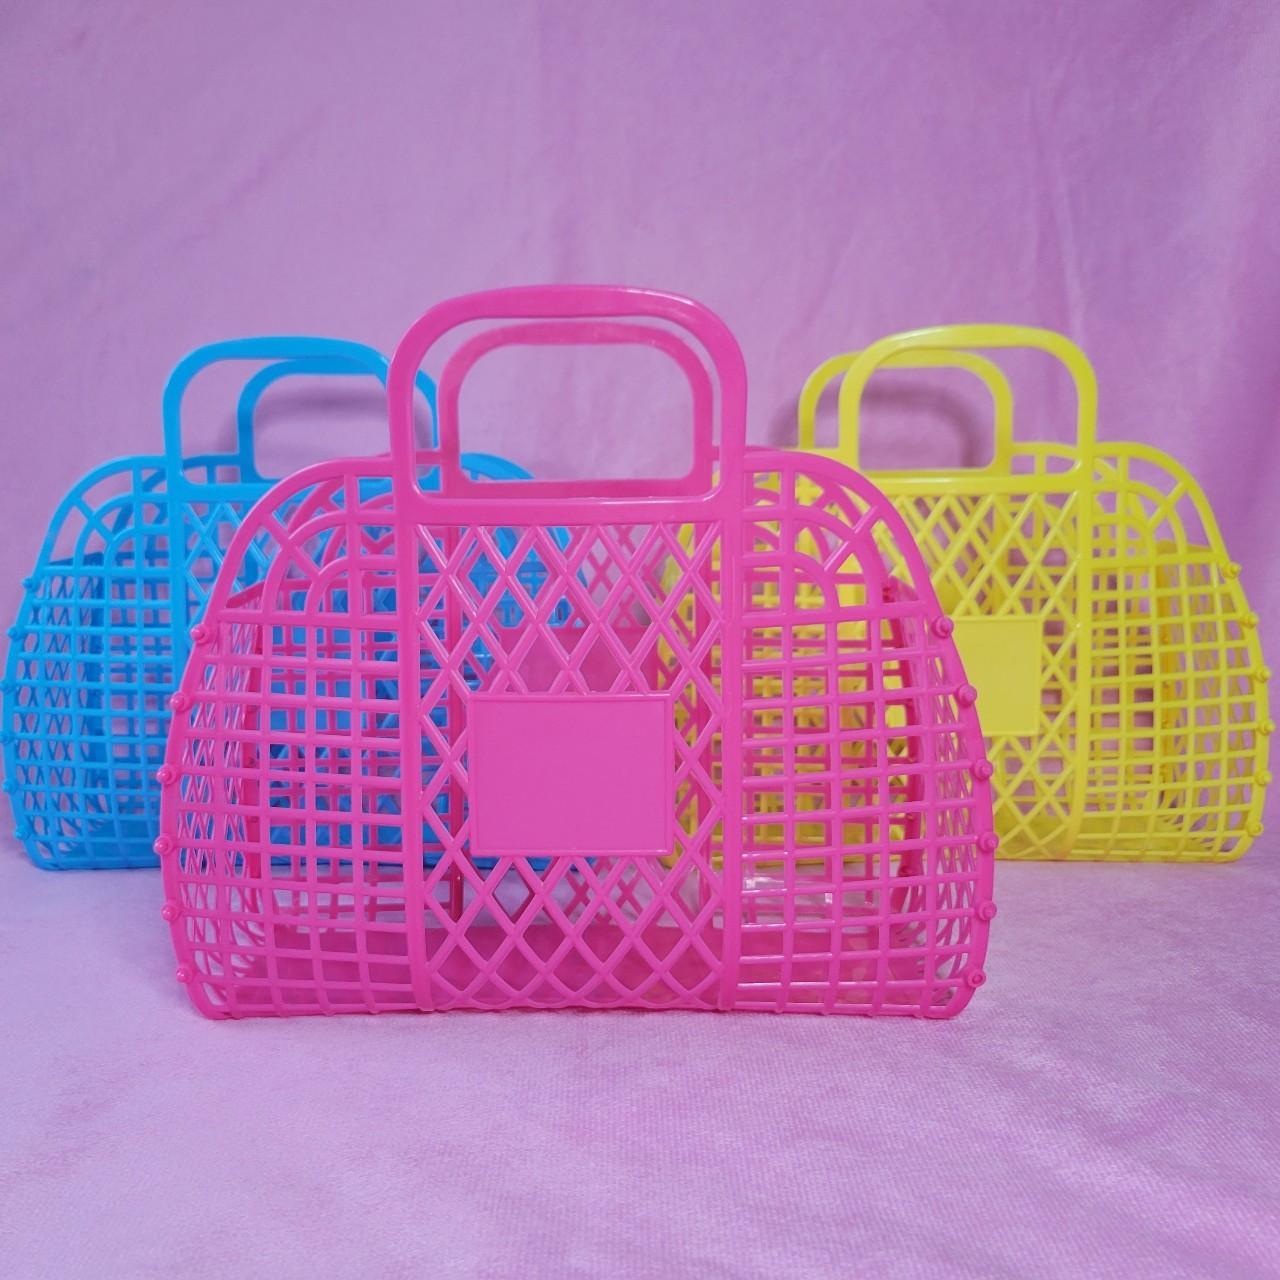 Retro jelly bags brand new comes in 3 different